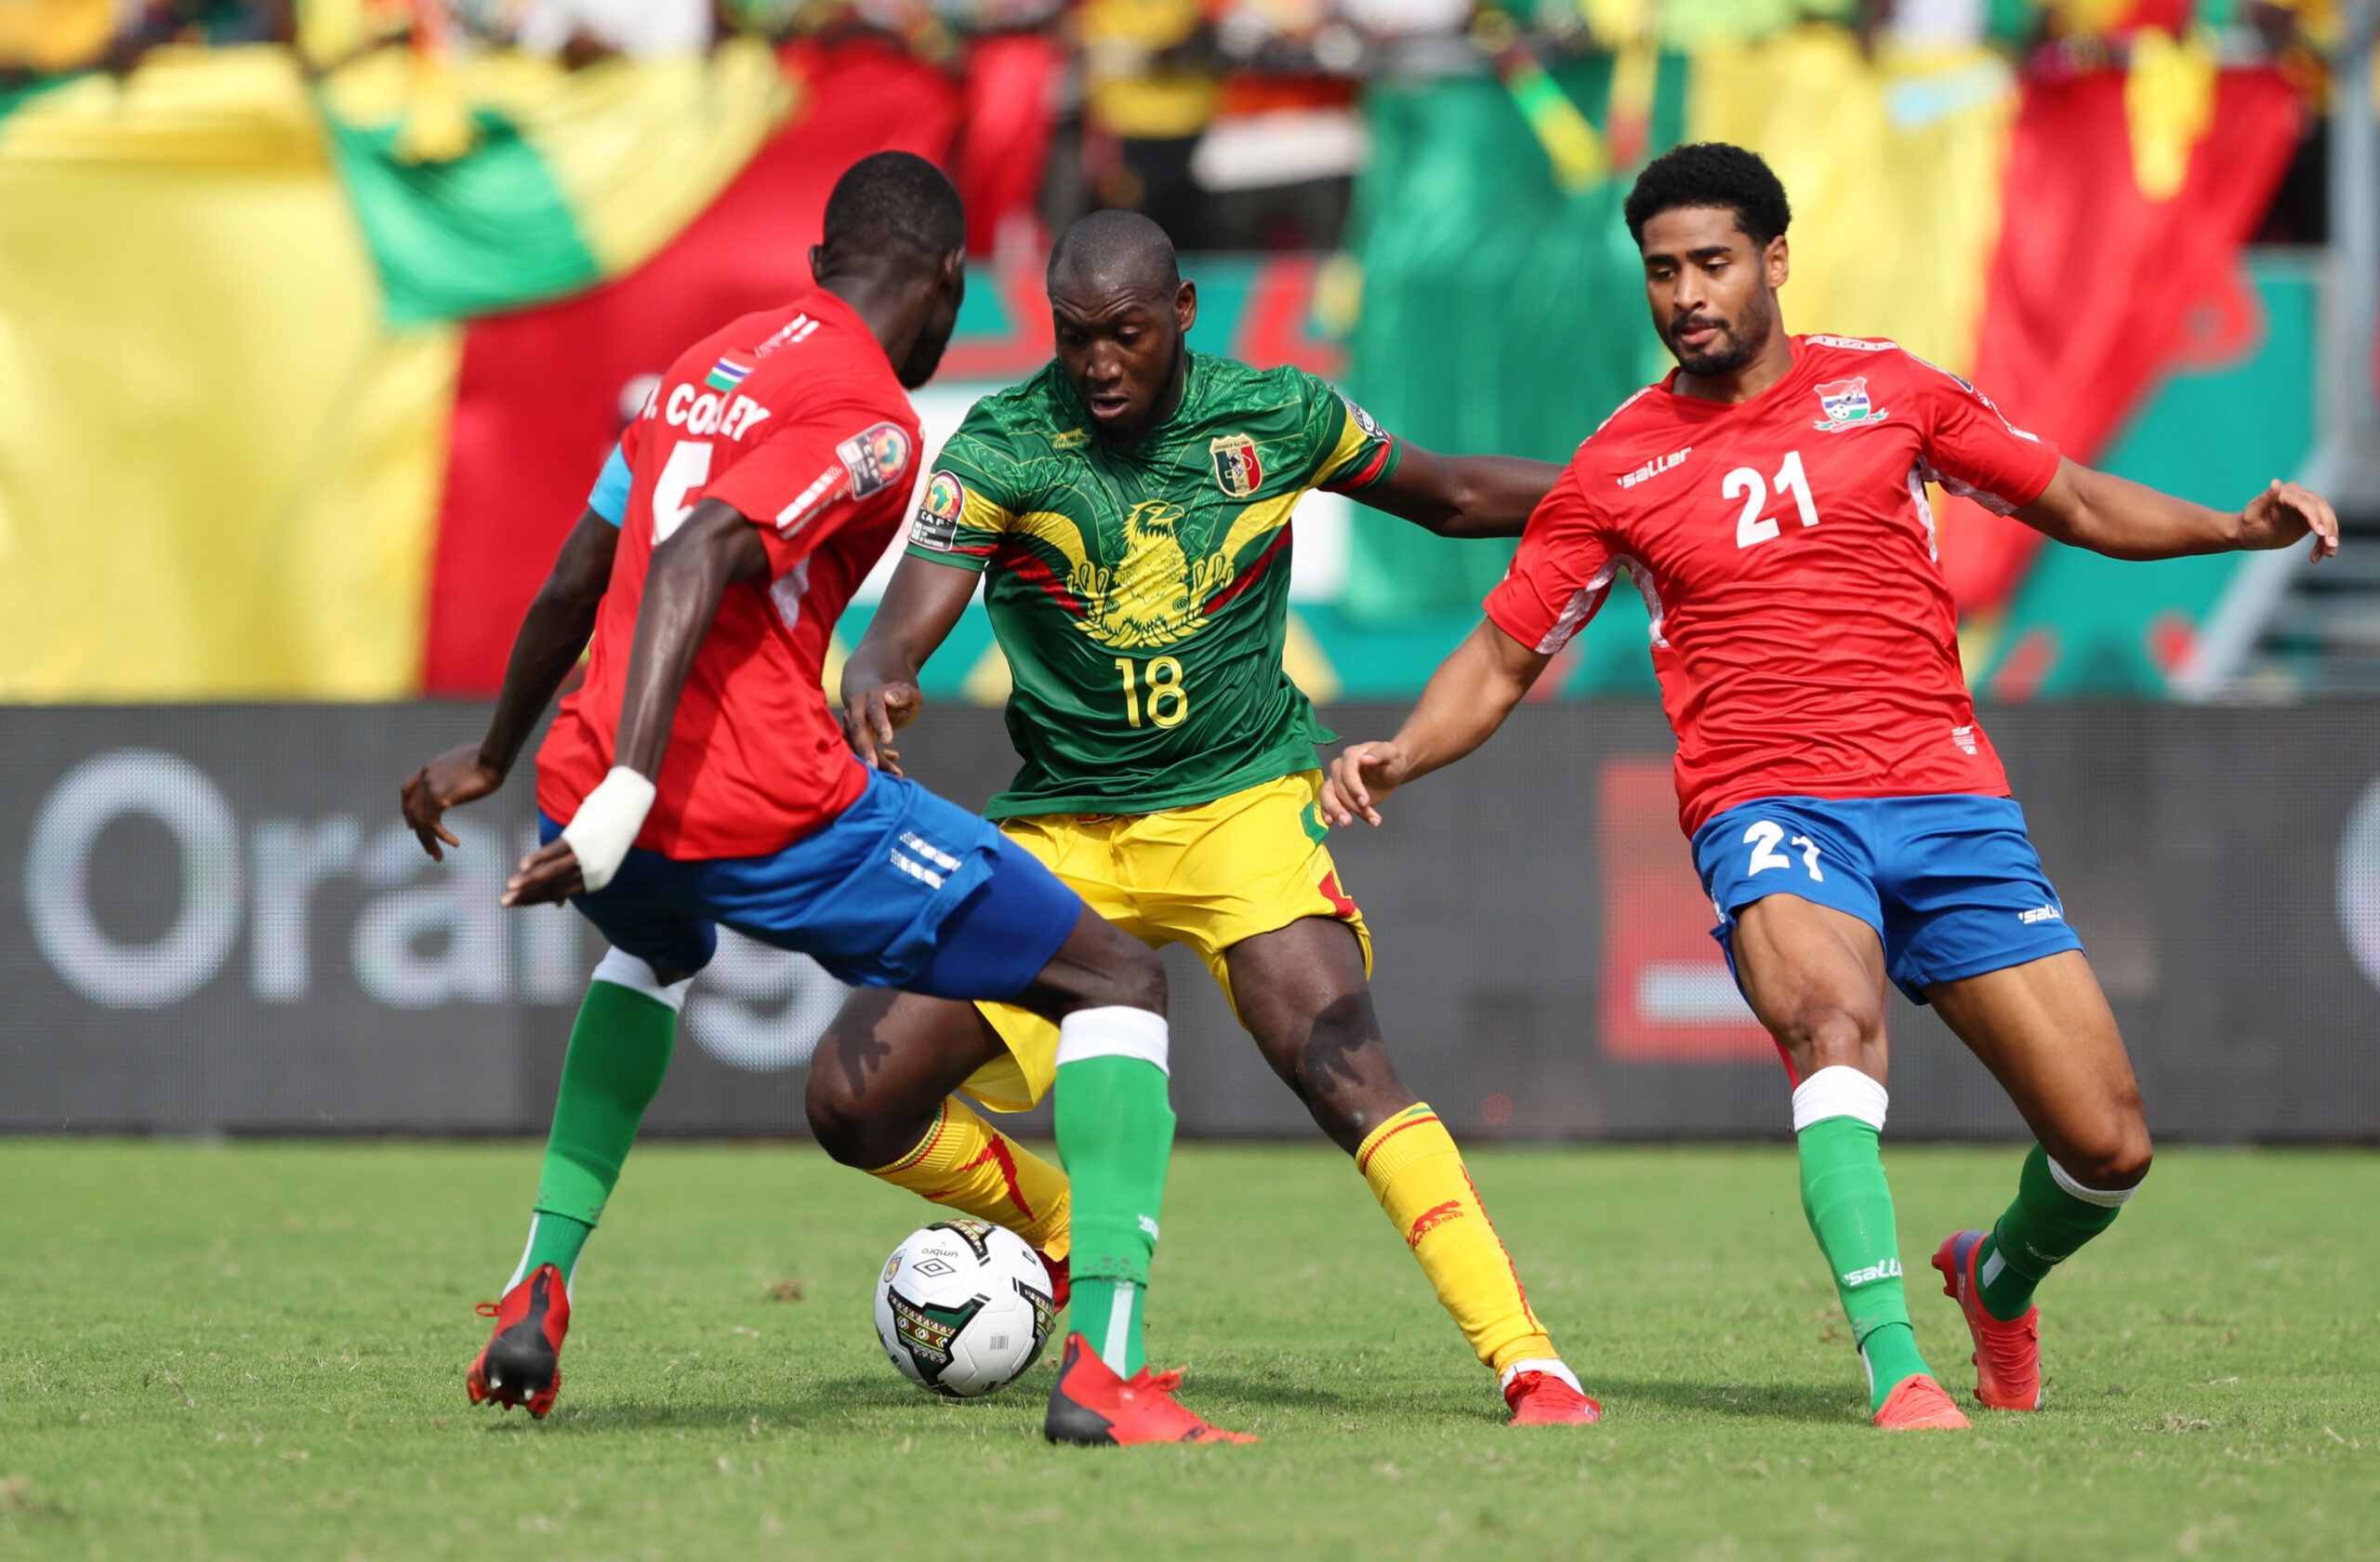 Soccer Football - Africa Cup of Nations - Group F - Gambia v Mali - Limbe Omnisport Stadium, Limbe, Cameroon - January 16, 2022 Mali's Ibrahima Kone in action with Gambia's Saidy Janko and Omar Colley REUTERS/Mohamed Abd El Ghany